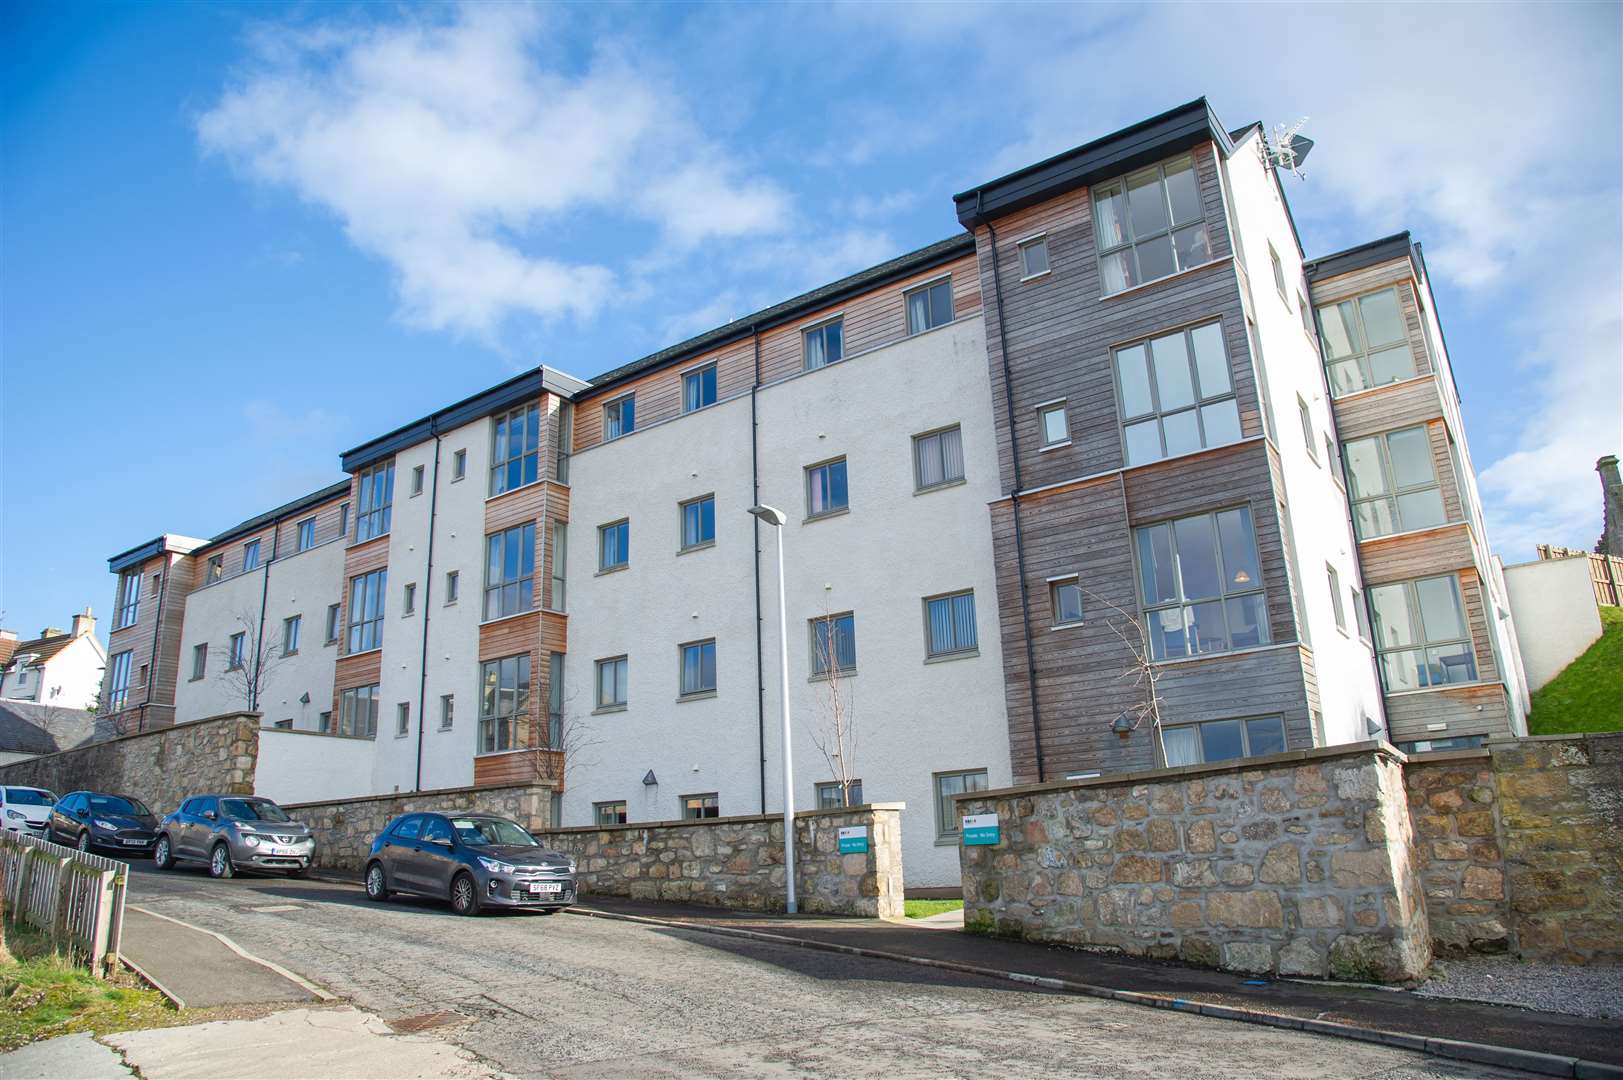 Varis Court has 33 two-bedroom apartments, 28 of which provide housing with care. Five are led by the Forres Neighbourhood Nursing Team, a Buurtzorg test site.